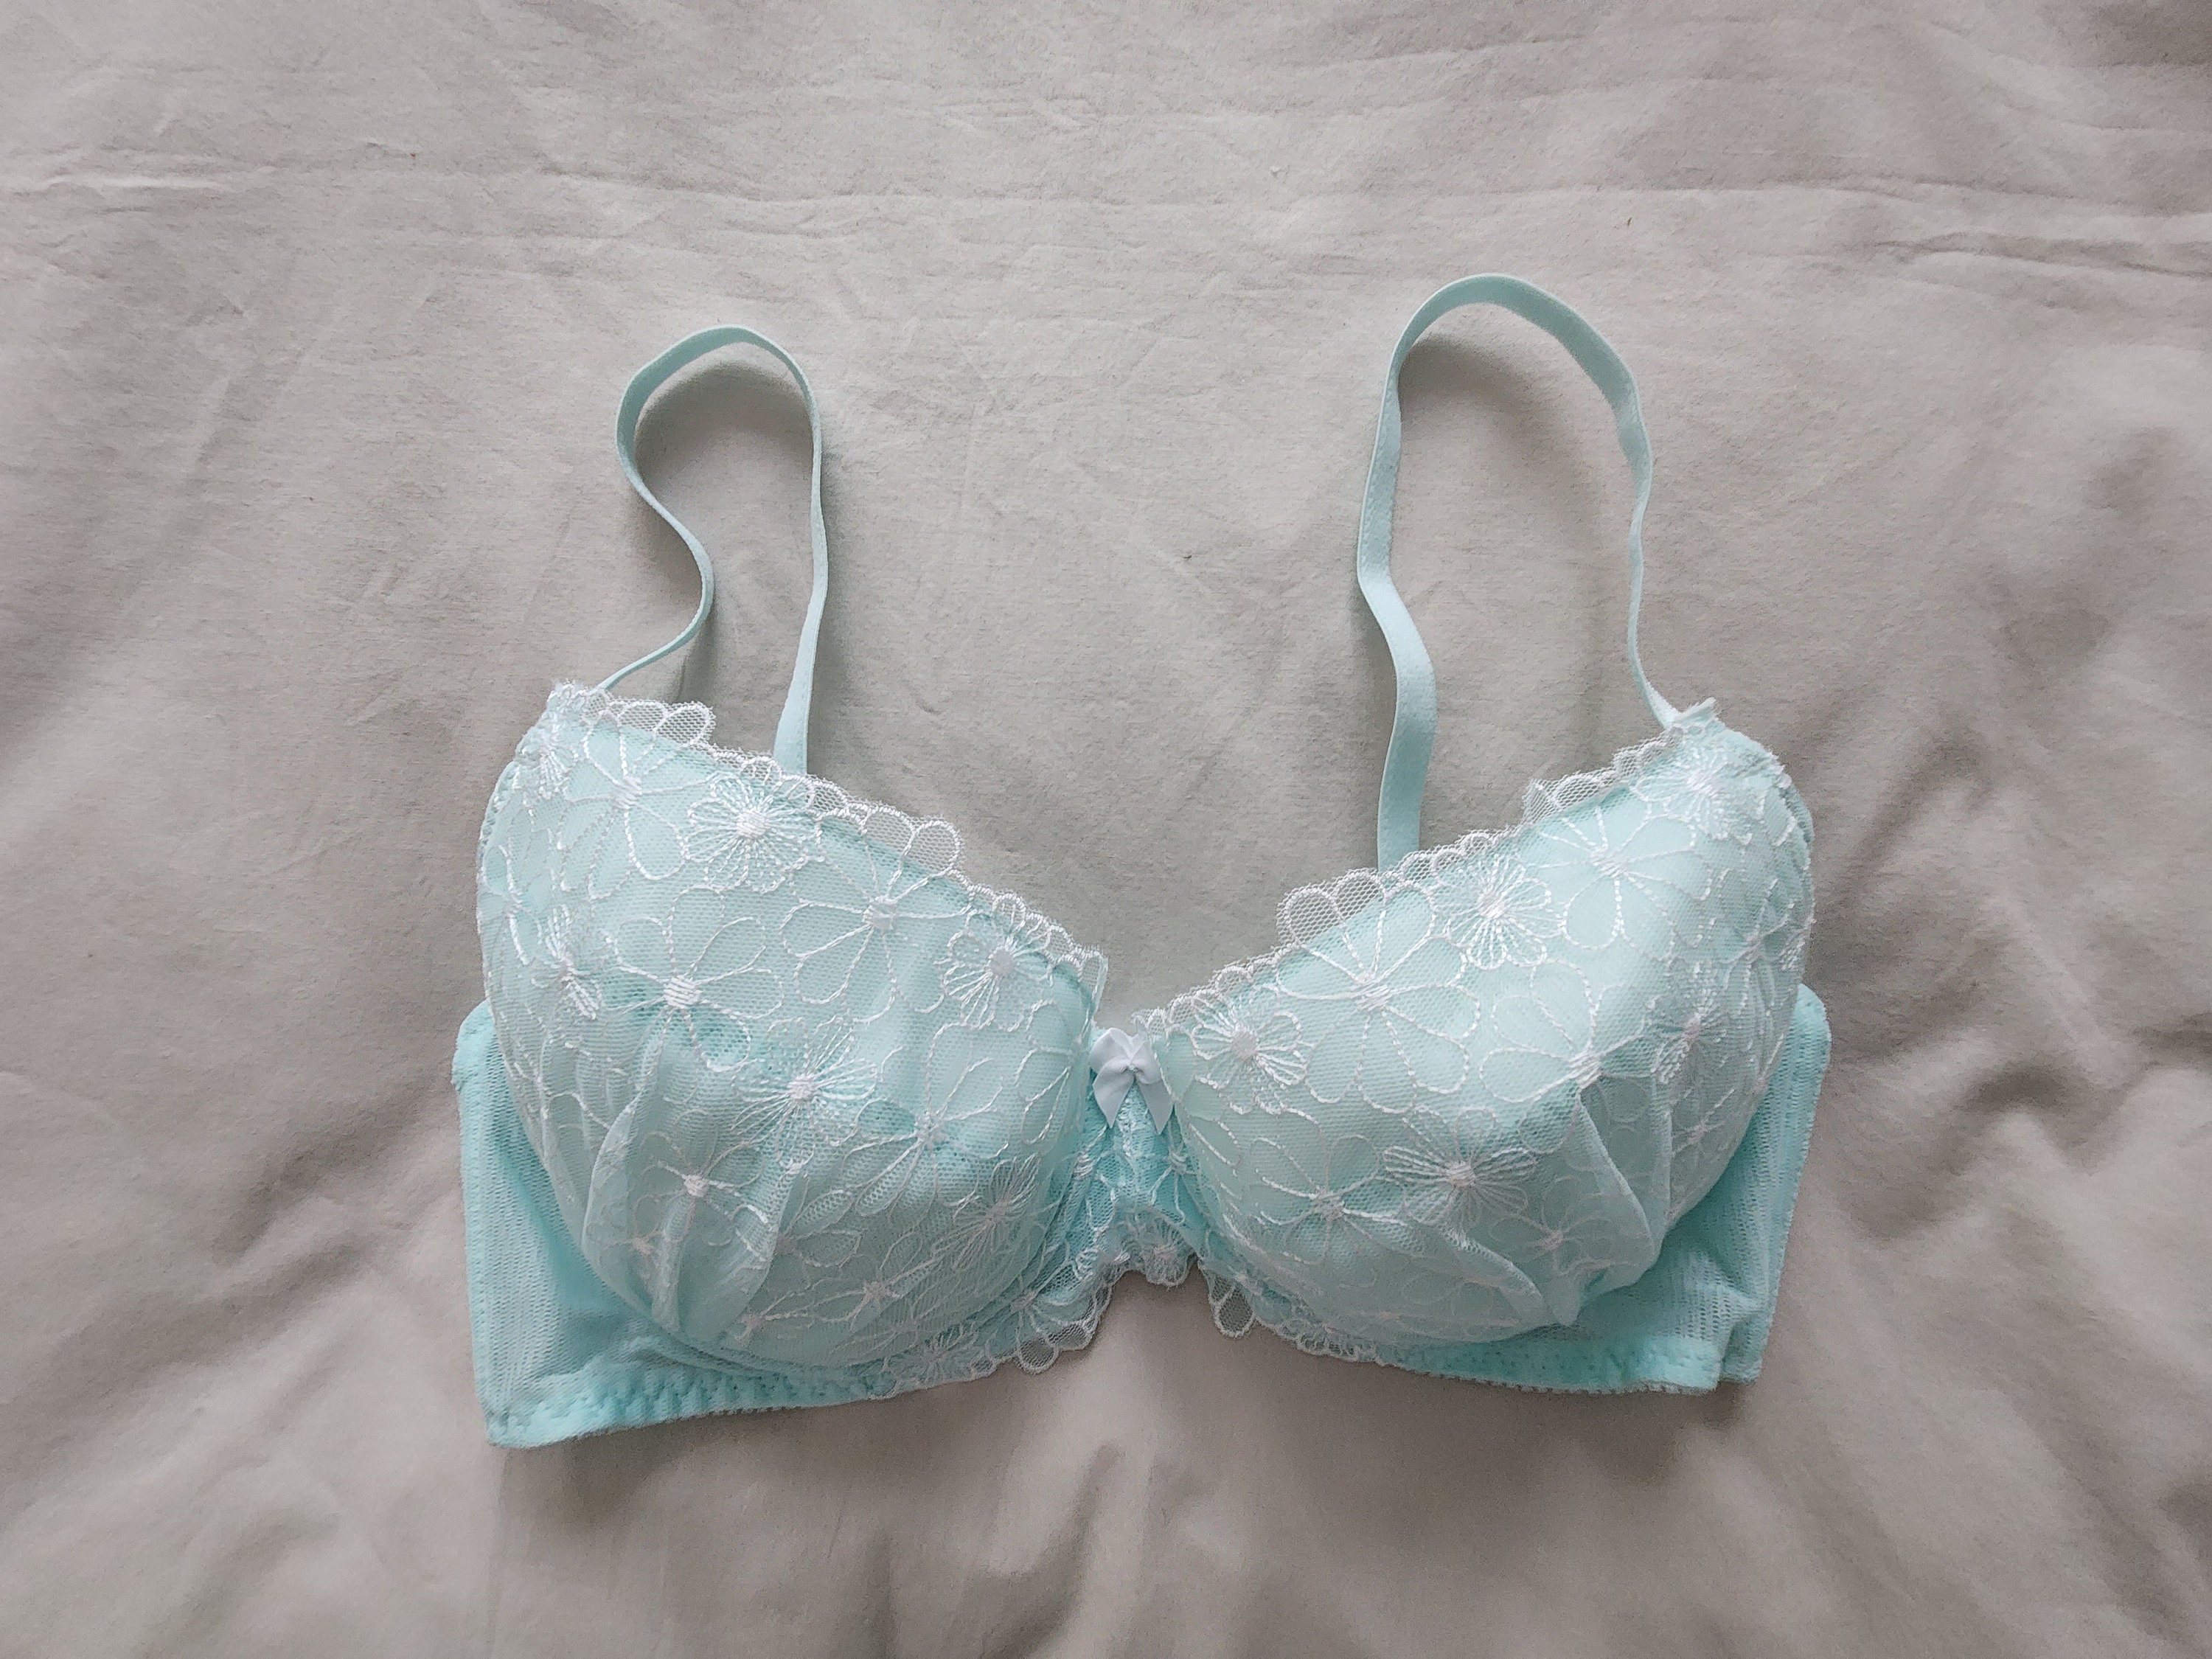 Vintage Old New Stock Bra From Japan 9size 12D Aus & 34D UK/US, Japan F75 -   India